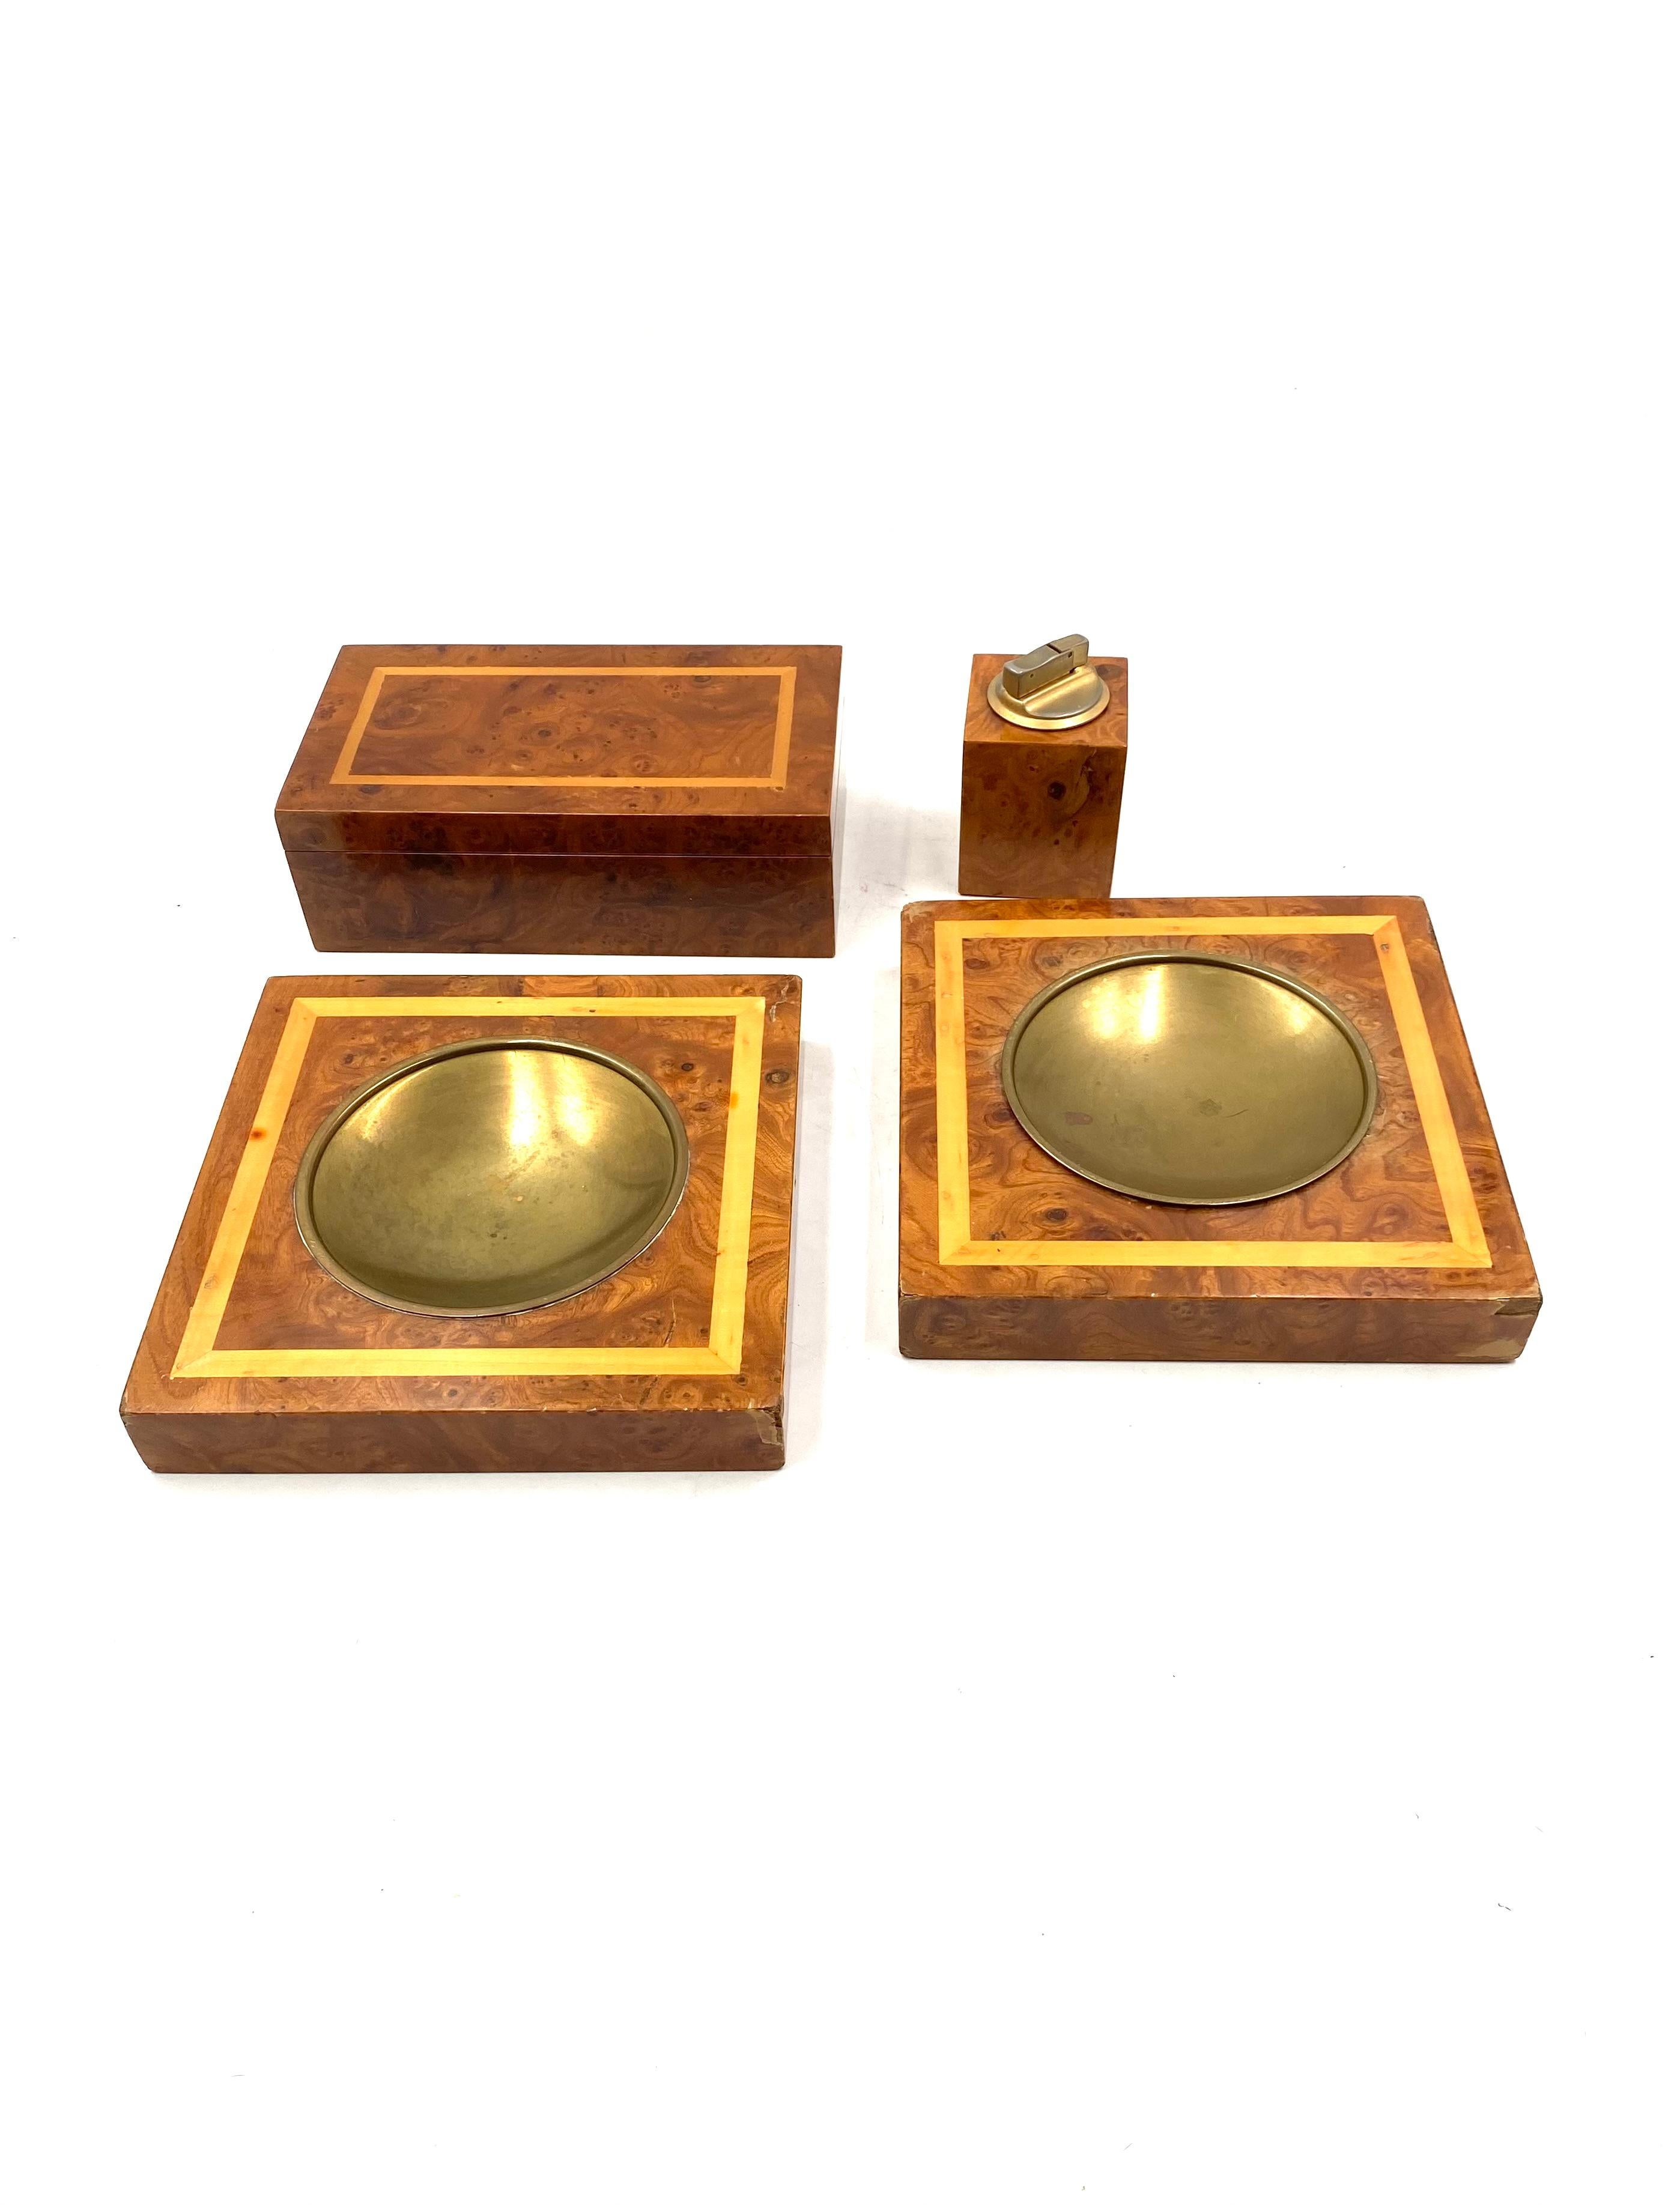 Late 20th Century Smoking Set, brass and wood ashtrays, lighter and cigars box, Italy 1970 For Sale